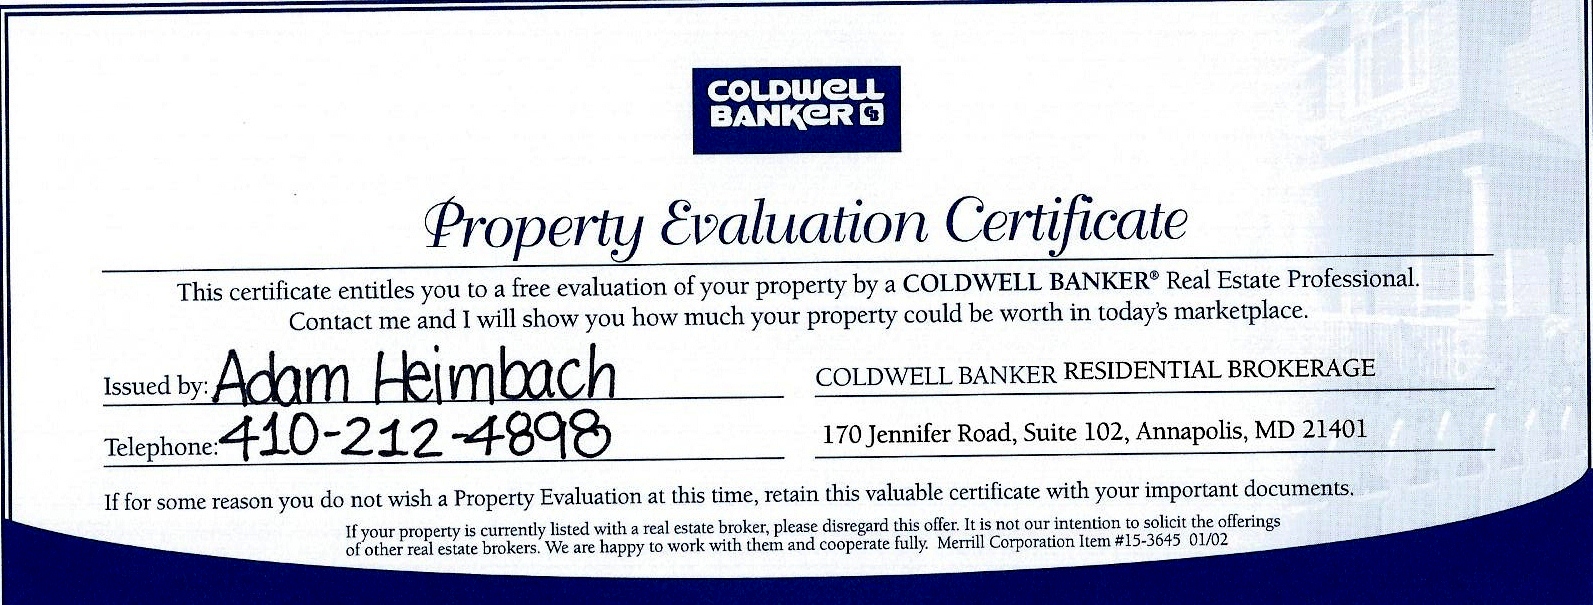 Coldwell Banker Conceirge Program